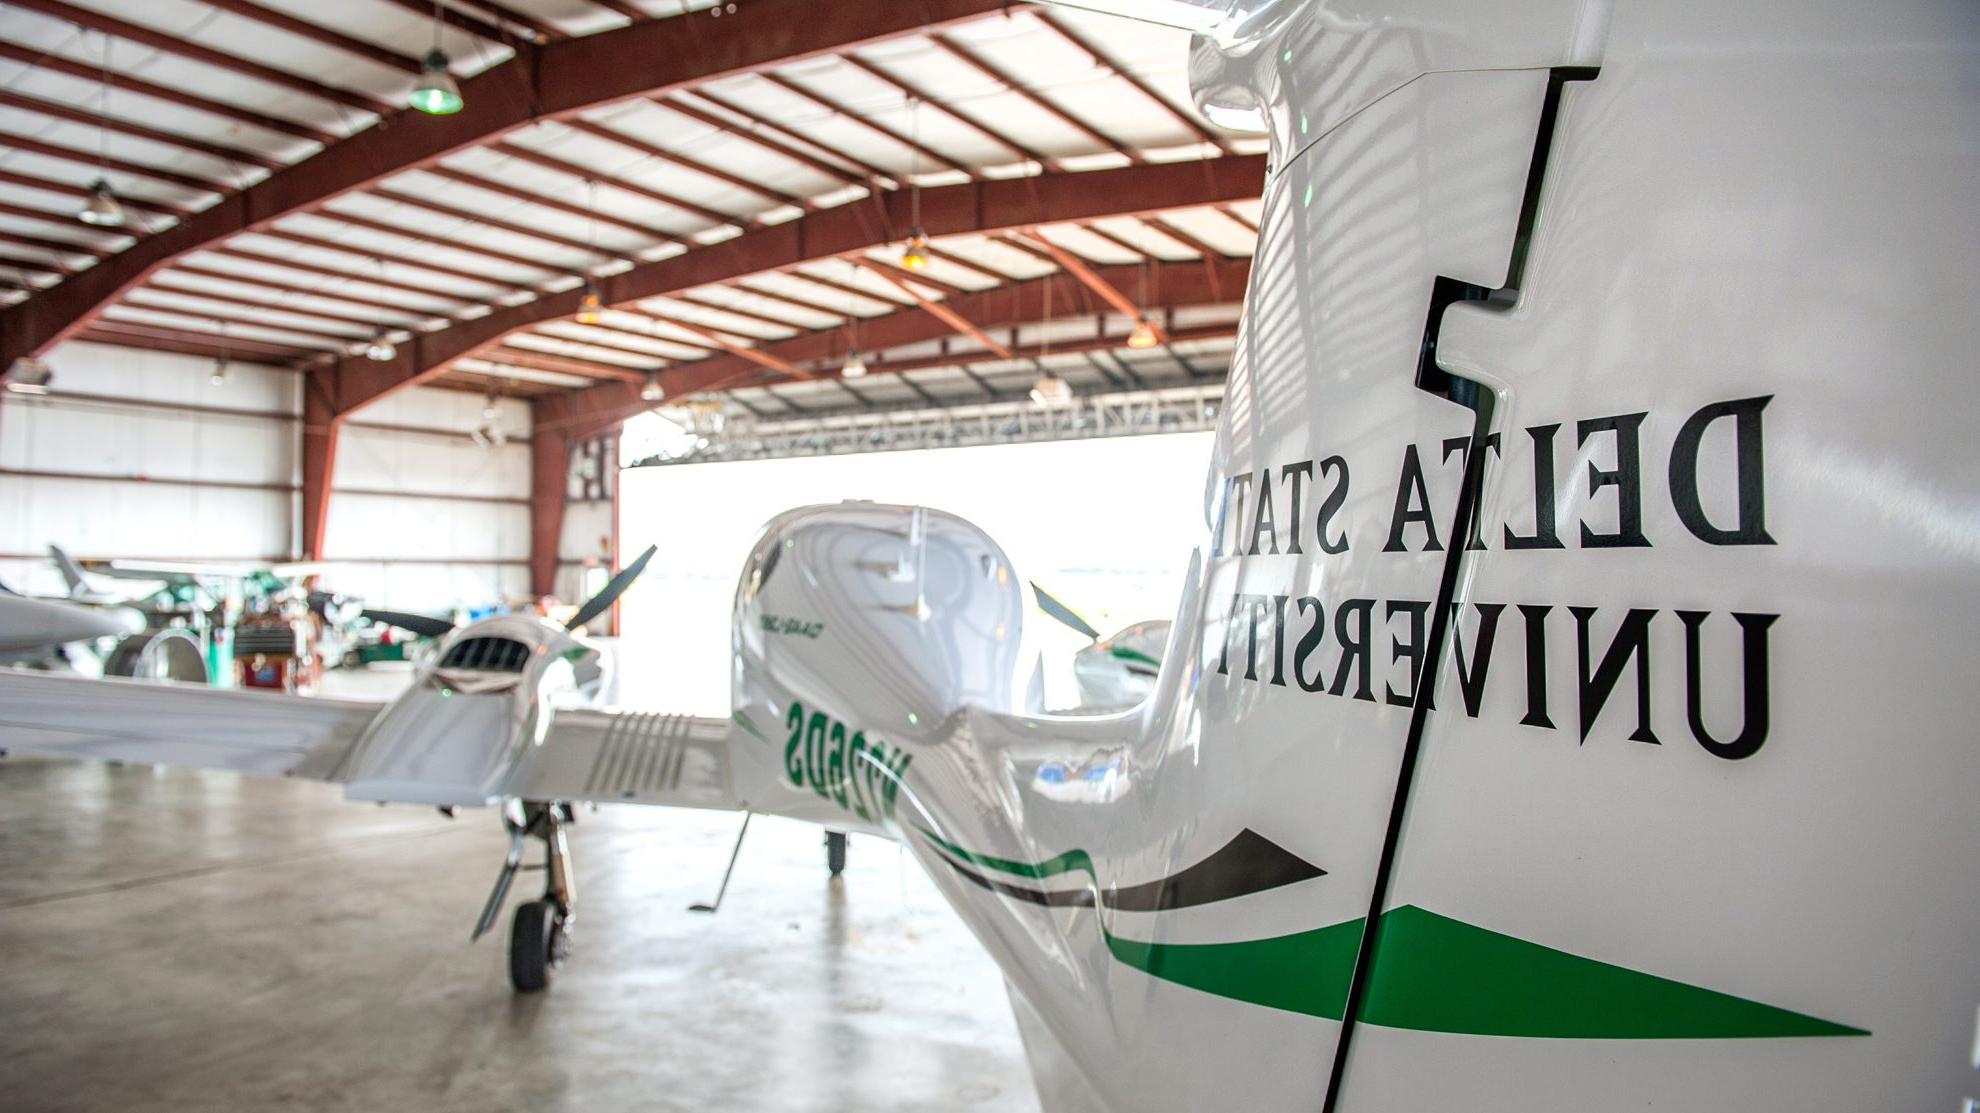 Delta State plane parked in the University airport hanger.